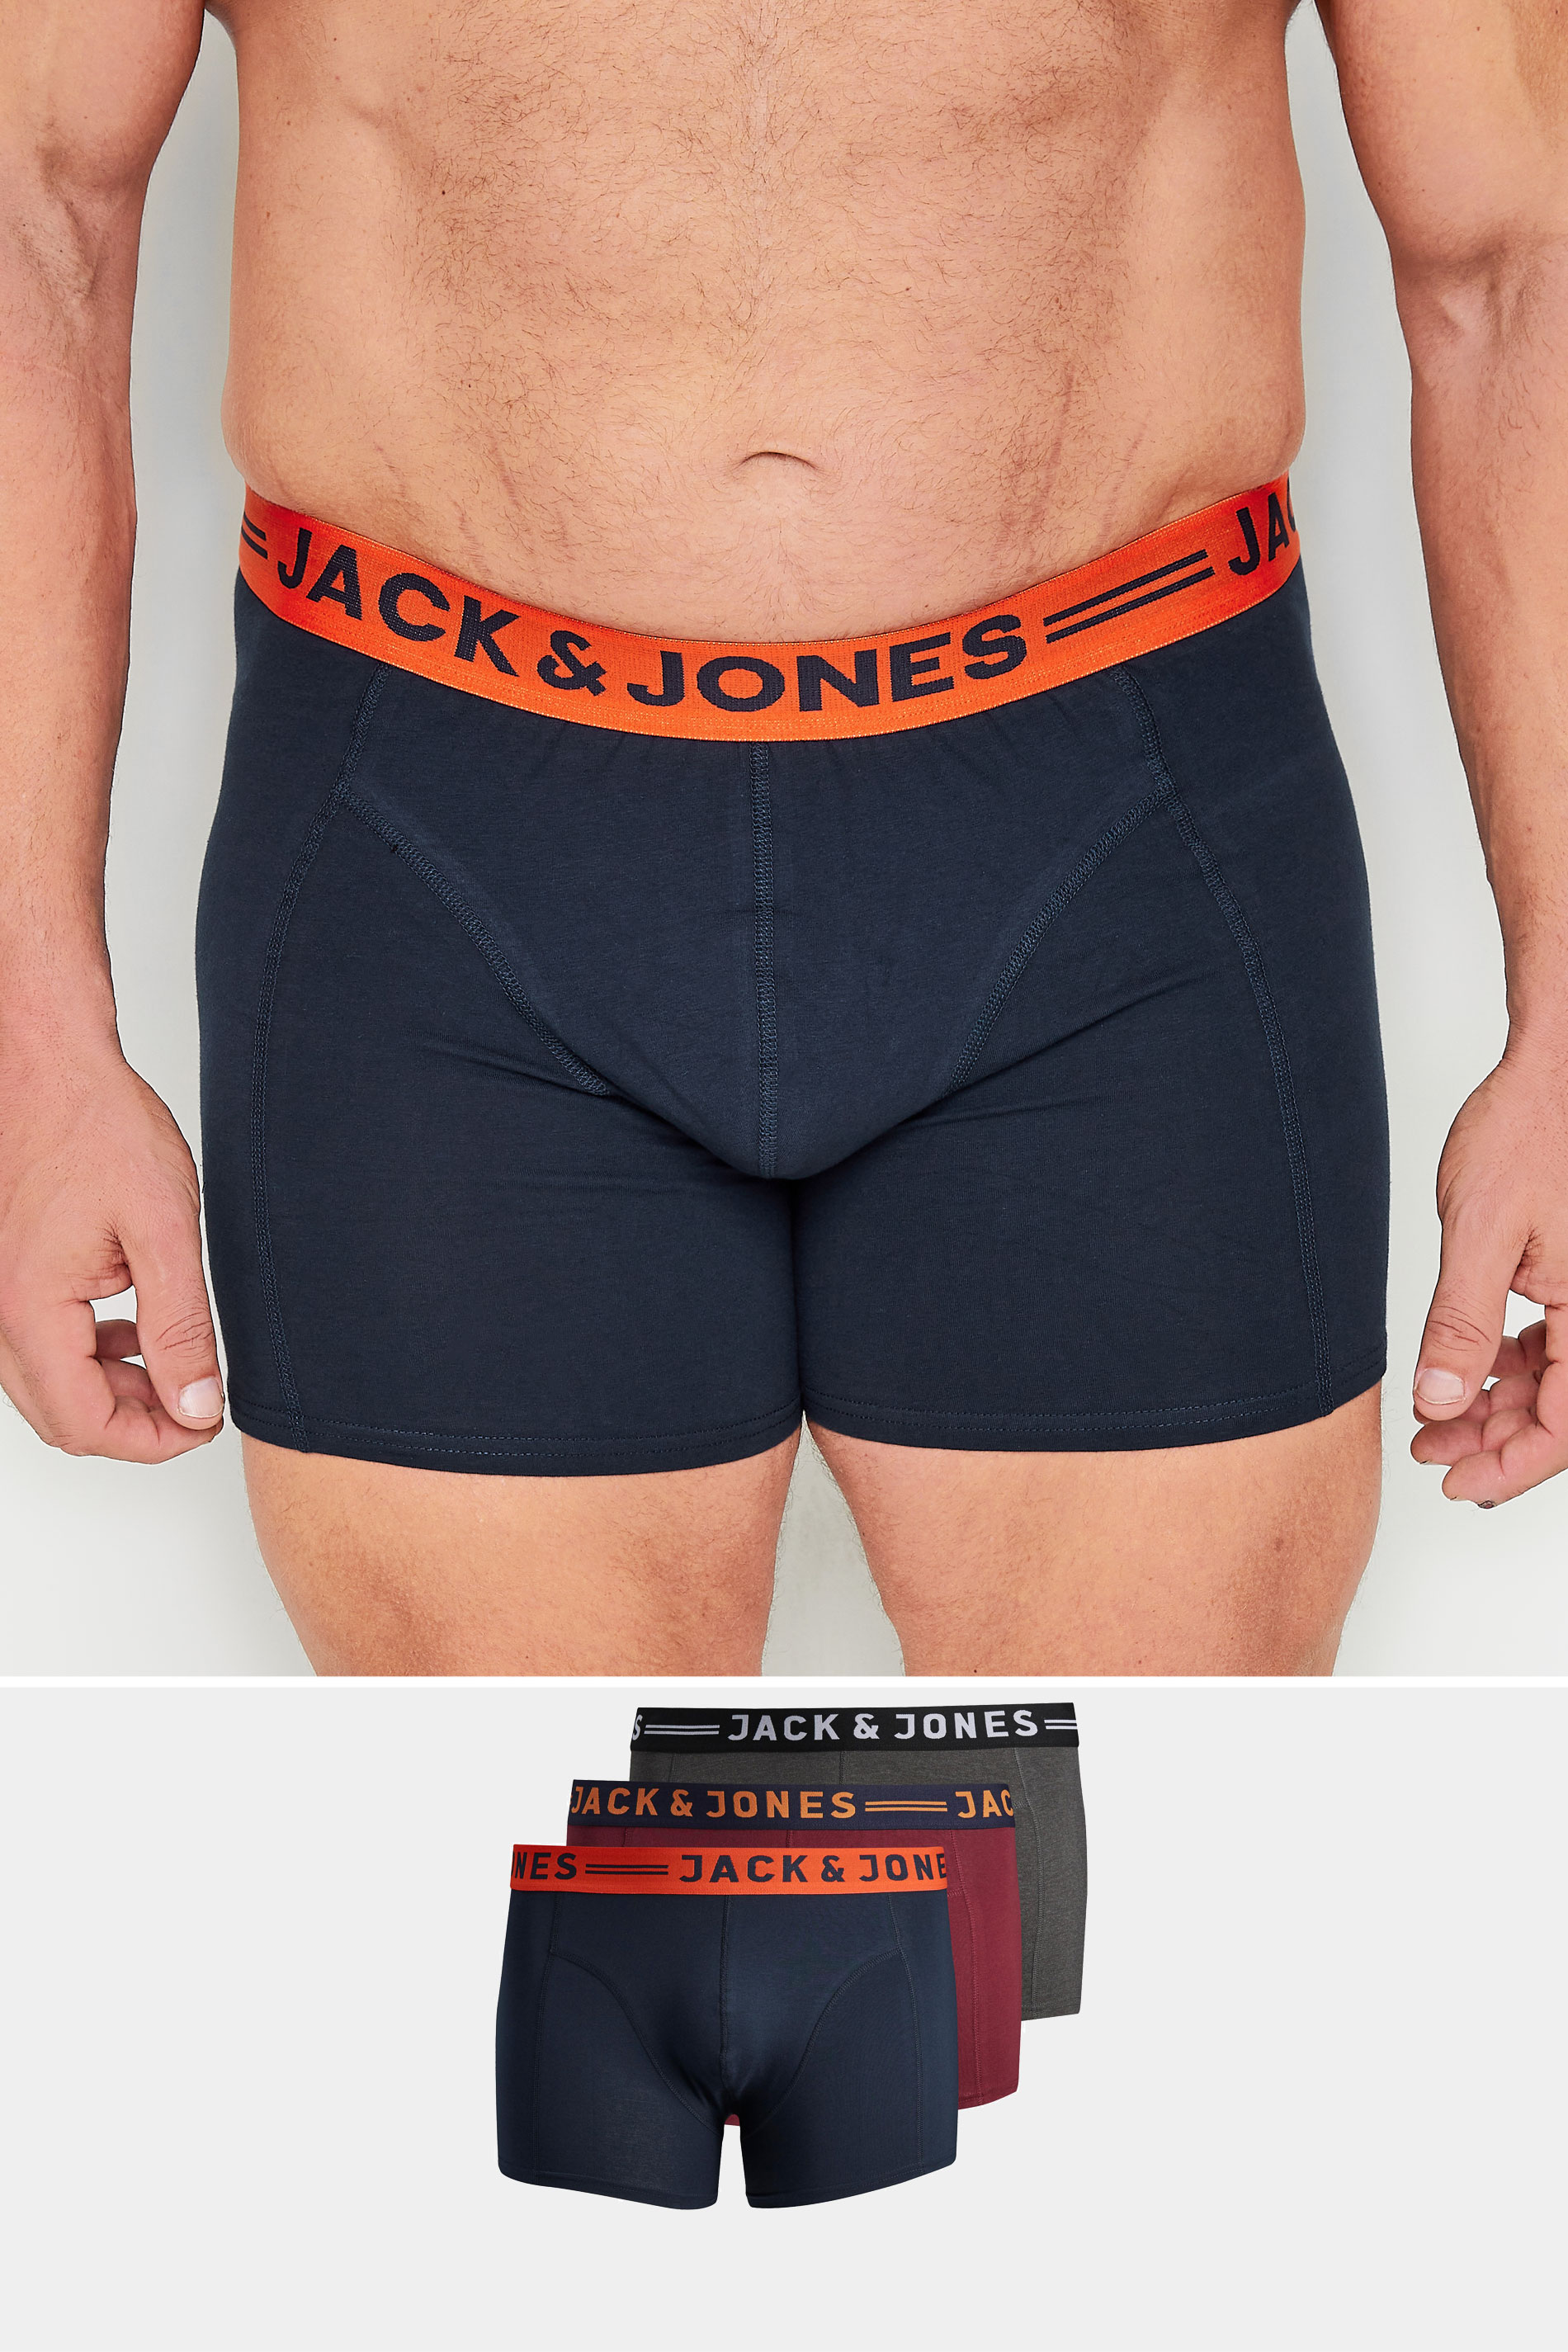 Image of Size 1Xl Mens Jack & Jones Red 3 Pack Trunks Big & Tall